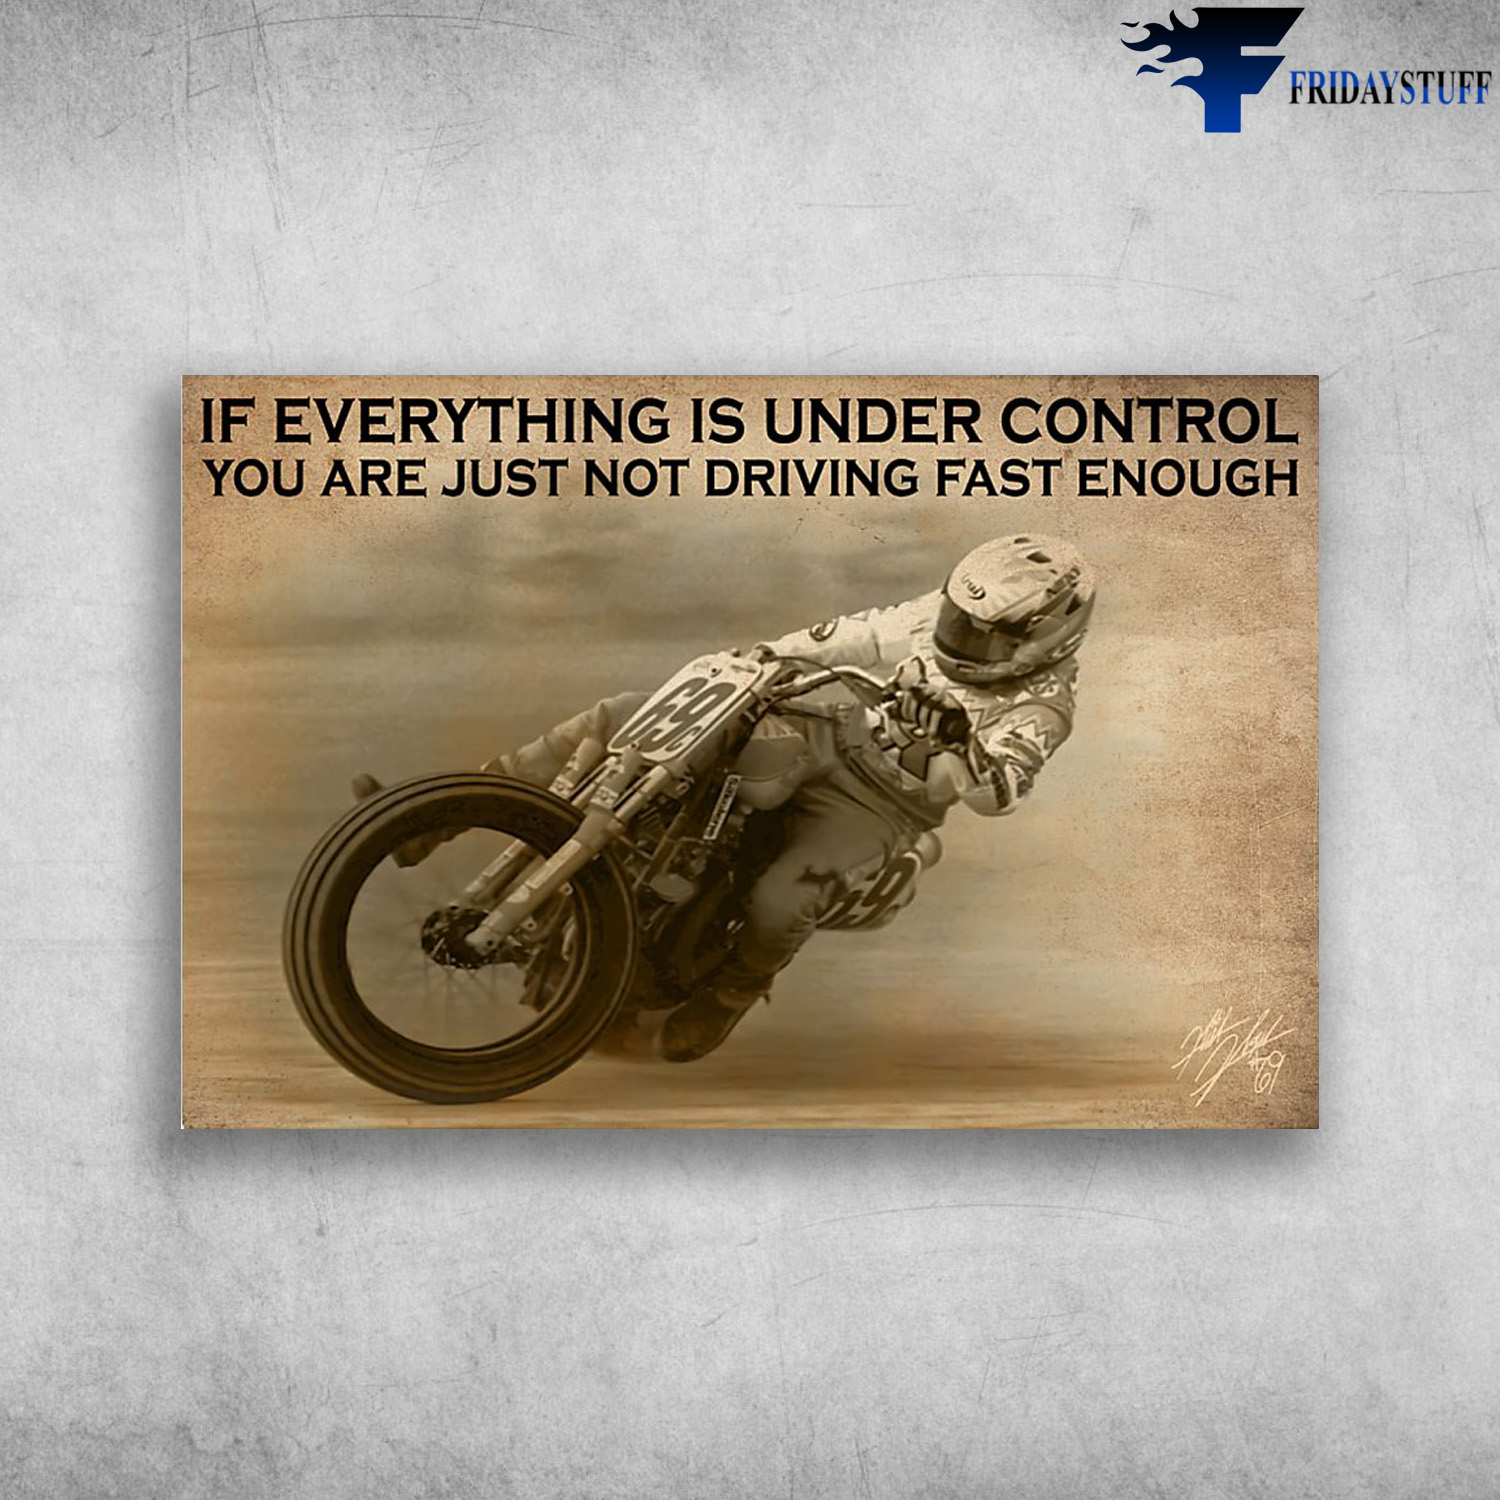 Man Riding Motorcycle - If Everything Is Under Control, You Are Just Not Driving Fast Enough